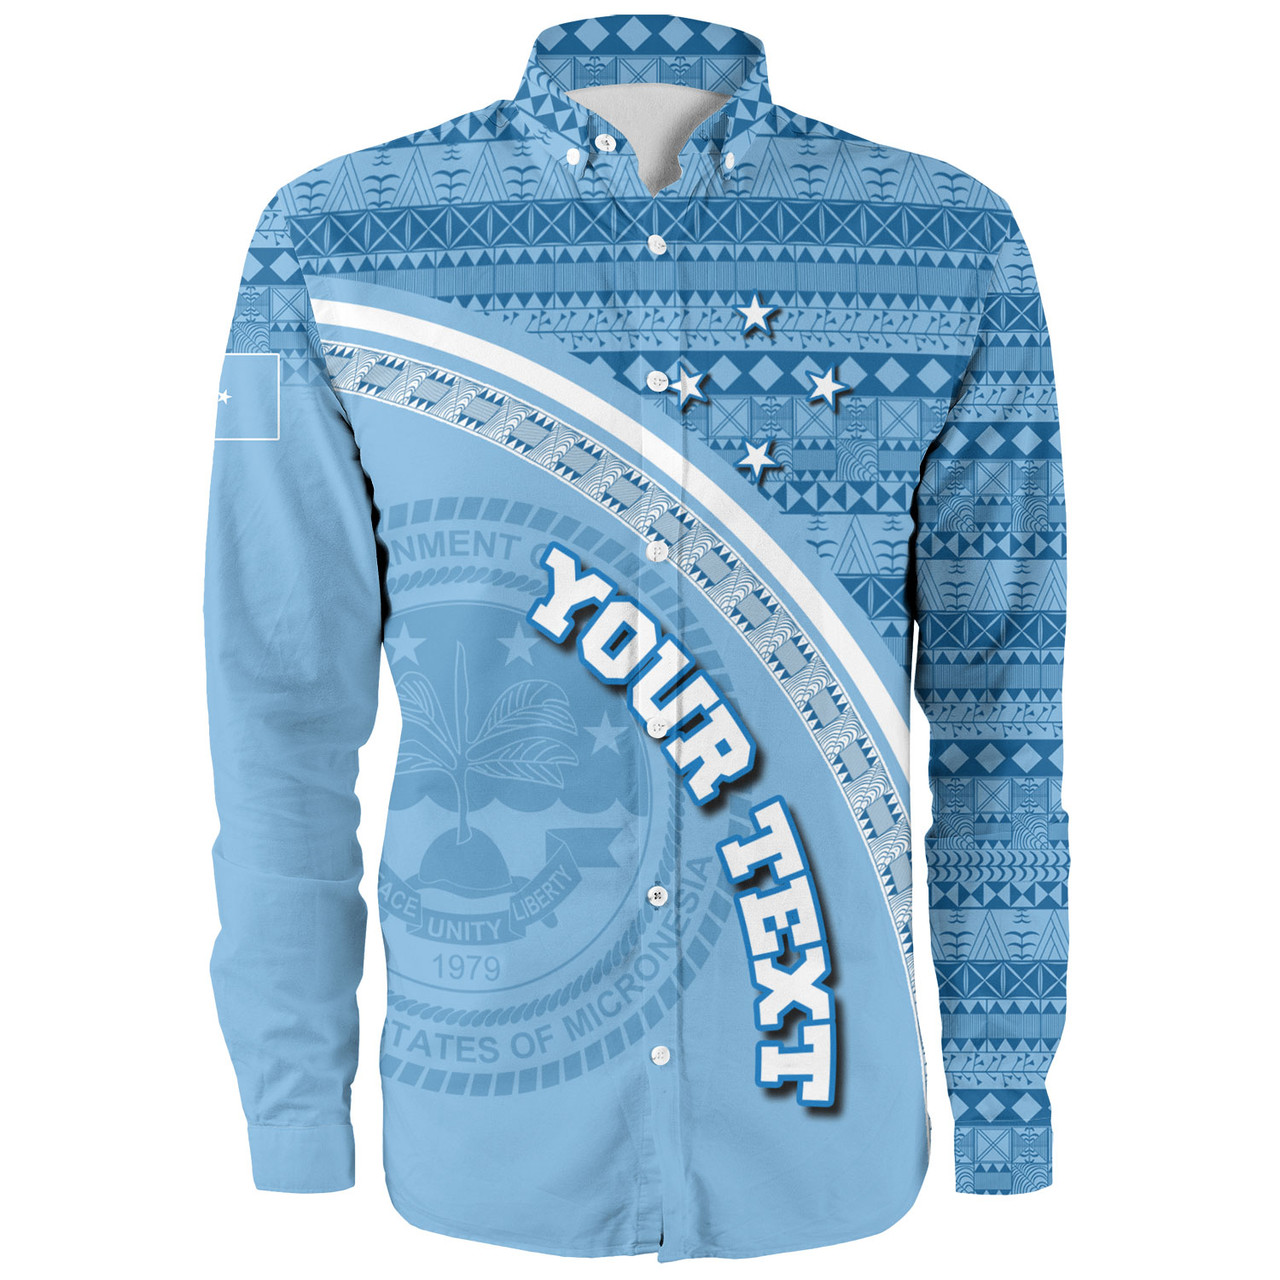 Federated States Of Micronesia Custom Personalised Long Sleeve Shirt Micronesia Tribal Patterns Curve Style